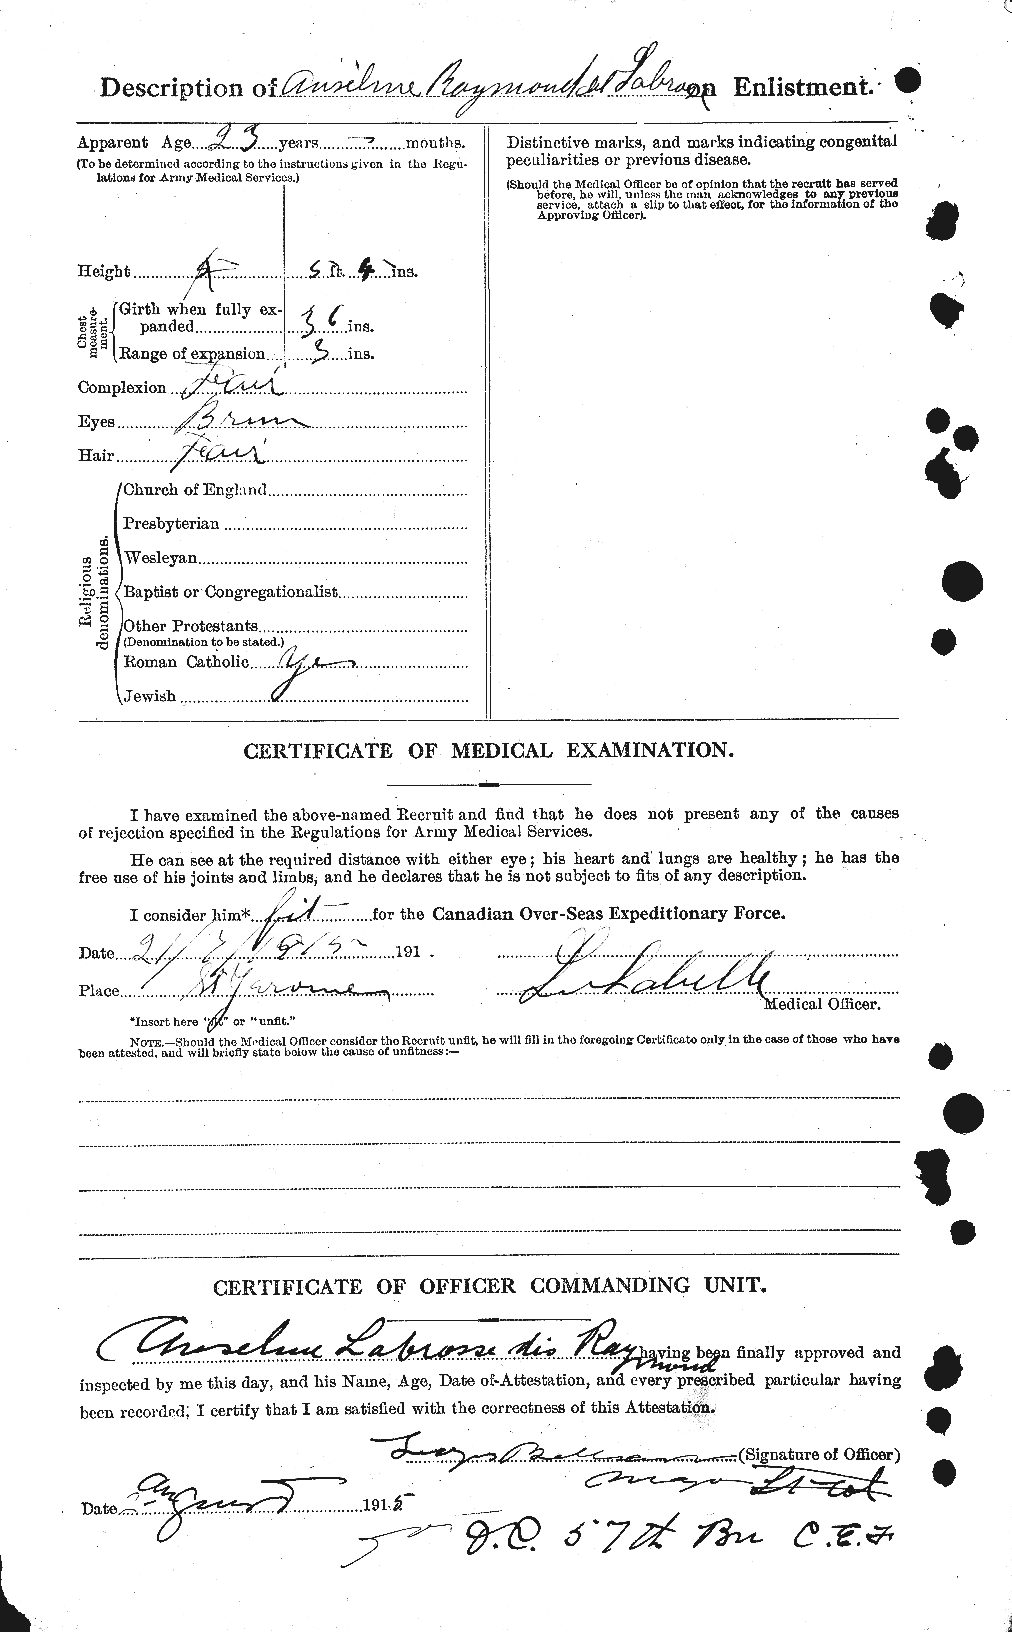 Personnel Records of the First World War - CEF 444298b